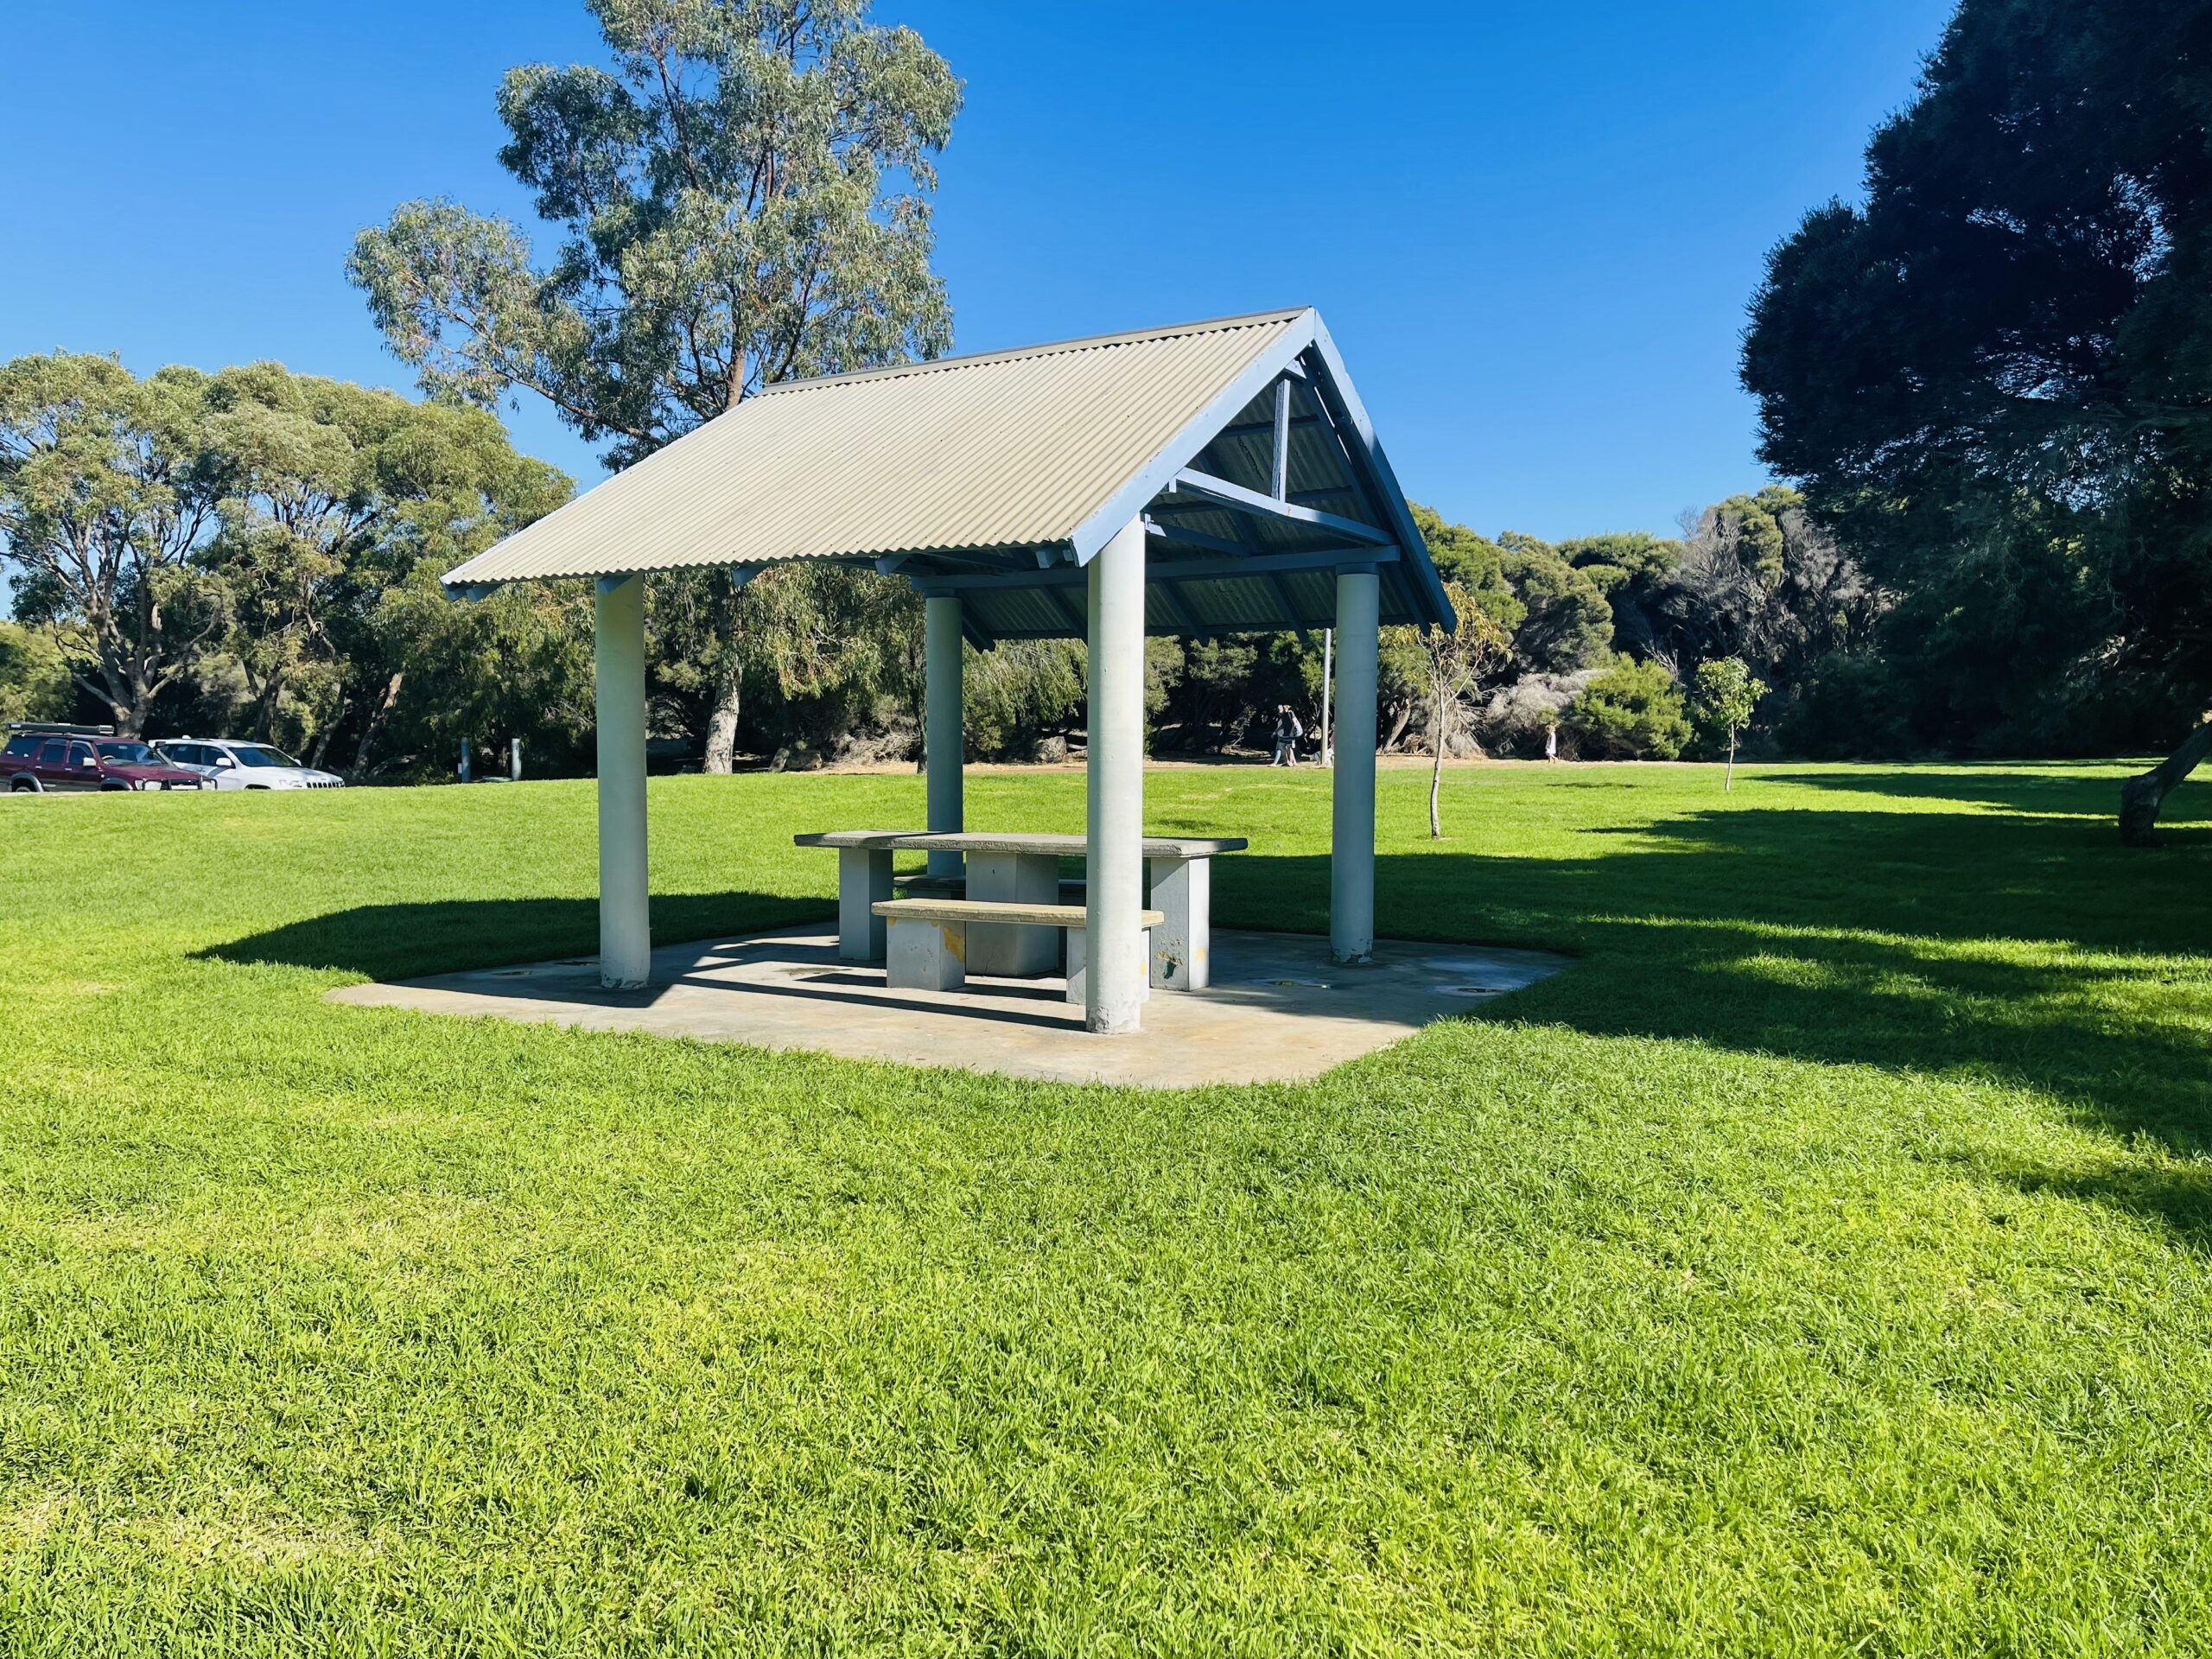 This photograph shows the closest sheltered picnic table to the barbecue. This structure has four tall grey beams and a grey tin roof with blue beams. The picnic table is concrete and grey in colour, and sits on a grey concrete slab.